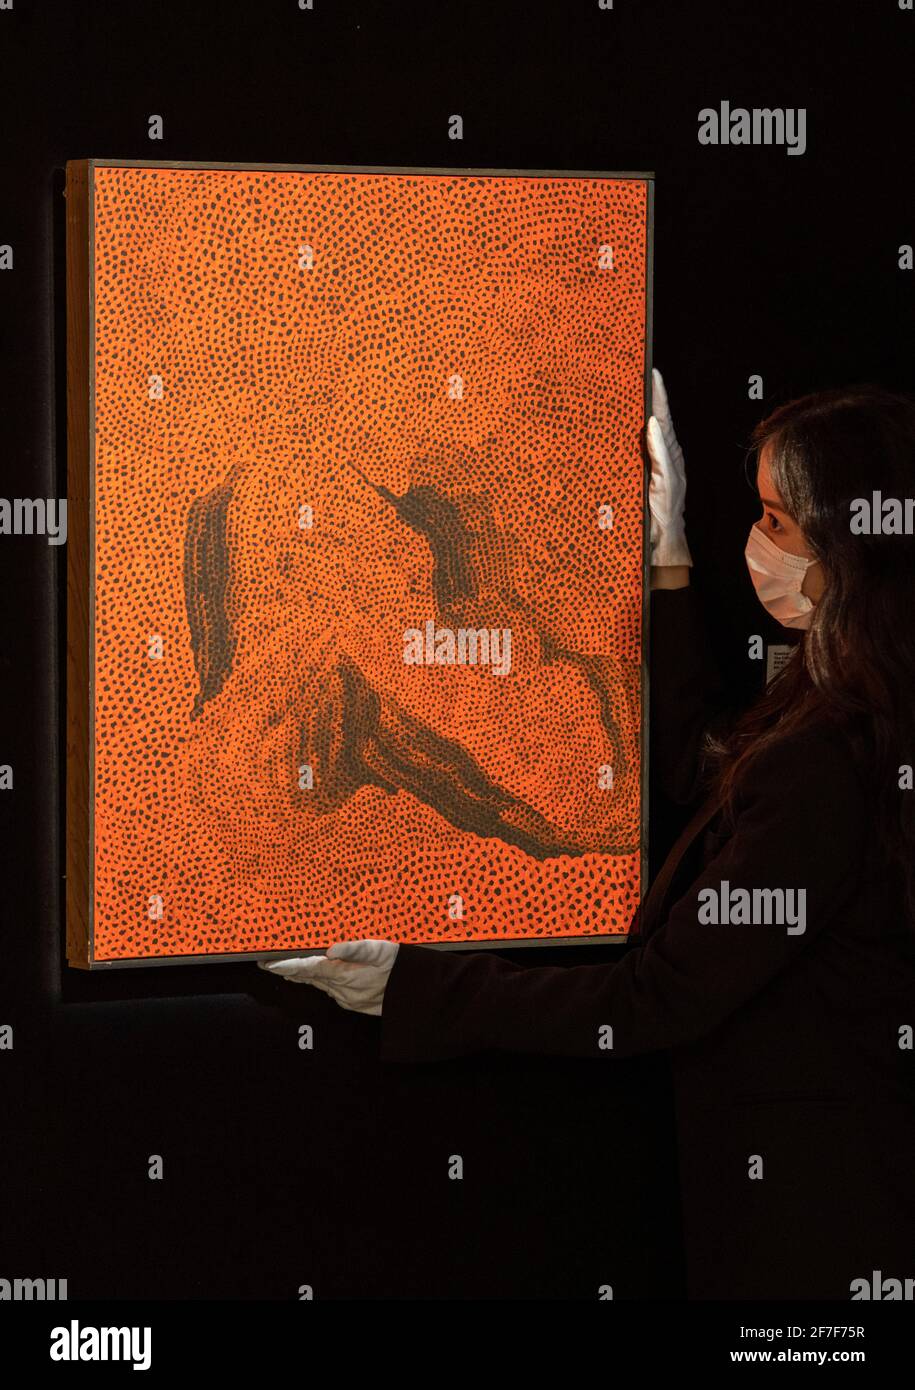 HONG KONG,HONG KONG SAR,CHINA: APRIL 7th 2021. Rare unseen works by Japanese painter Yayoi KUSAMA are up for sale at Bonhams New York  in their next auction. 6 of the 8 works are unveiled in the Bonhams gallery Hong Kong to generate presale interest. Cristina Wang, specialist of modern and contemporary art Hong Kong, adjusts the ÒHudson RiverÓ  Alamy Live news/Jayne Russell Stock Photo